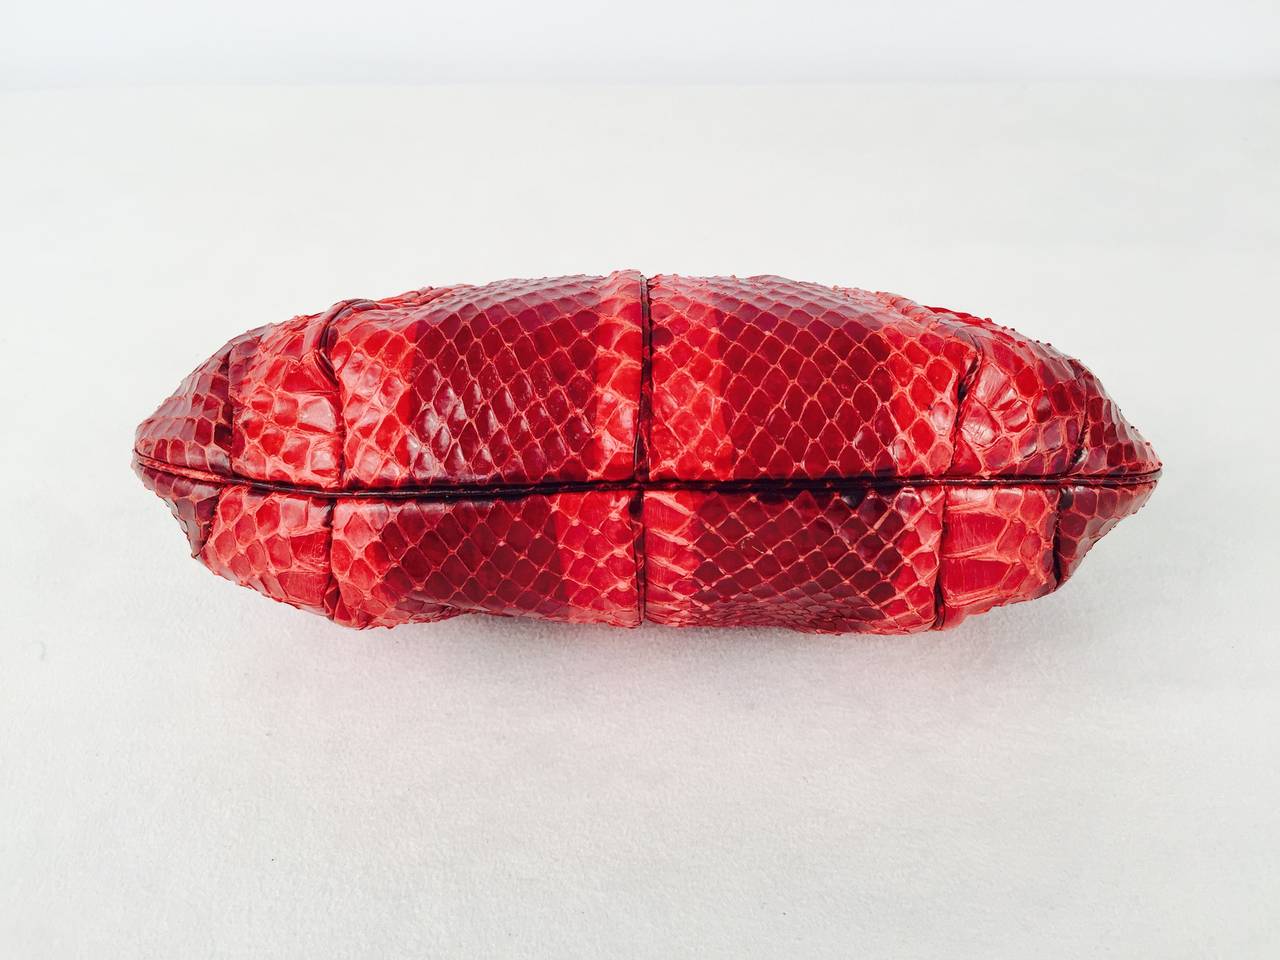 Judith Leiber Burgundy and Berry Snakeskin Evening Bag With Jeweled Clasp In Excellent Condition For Sale In Palm Beach, FL